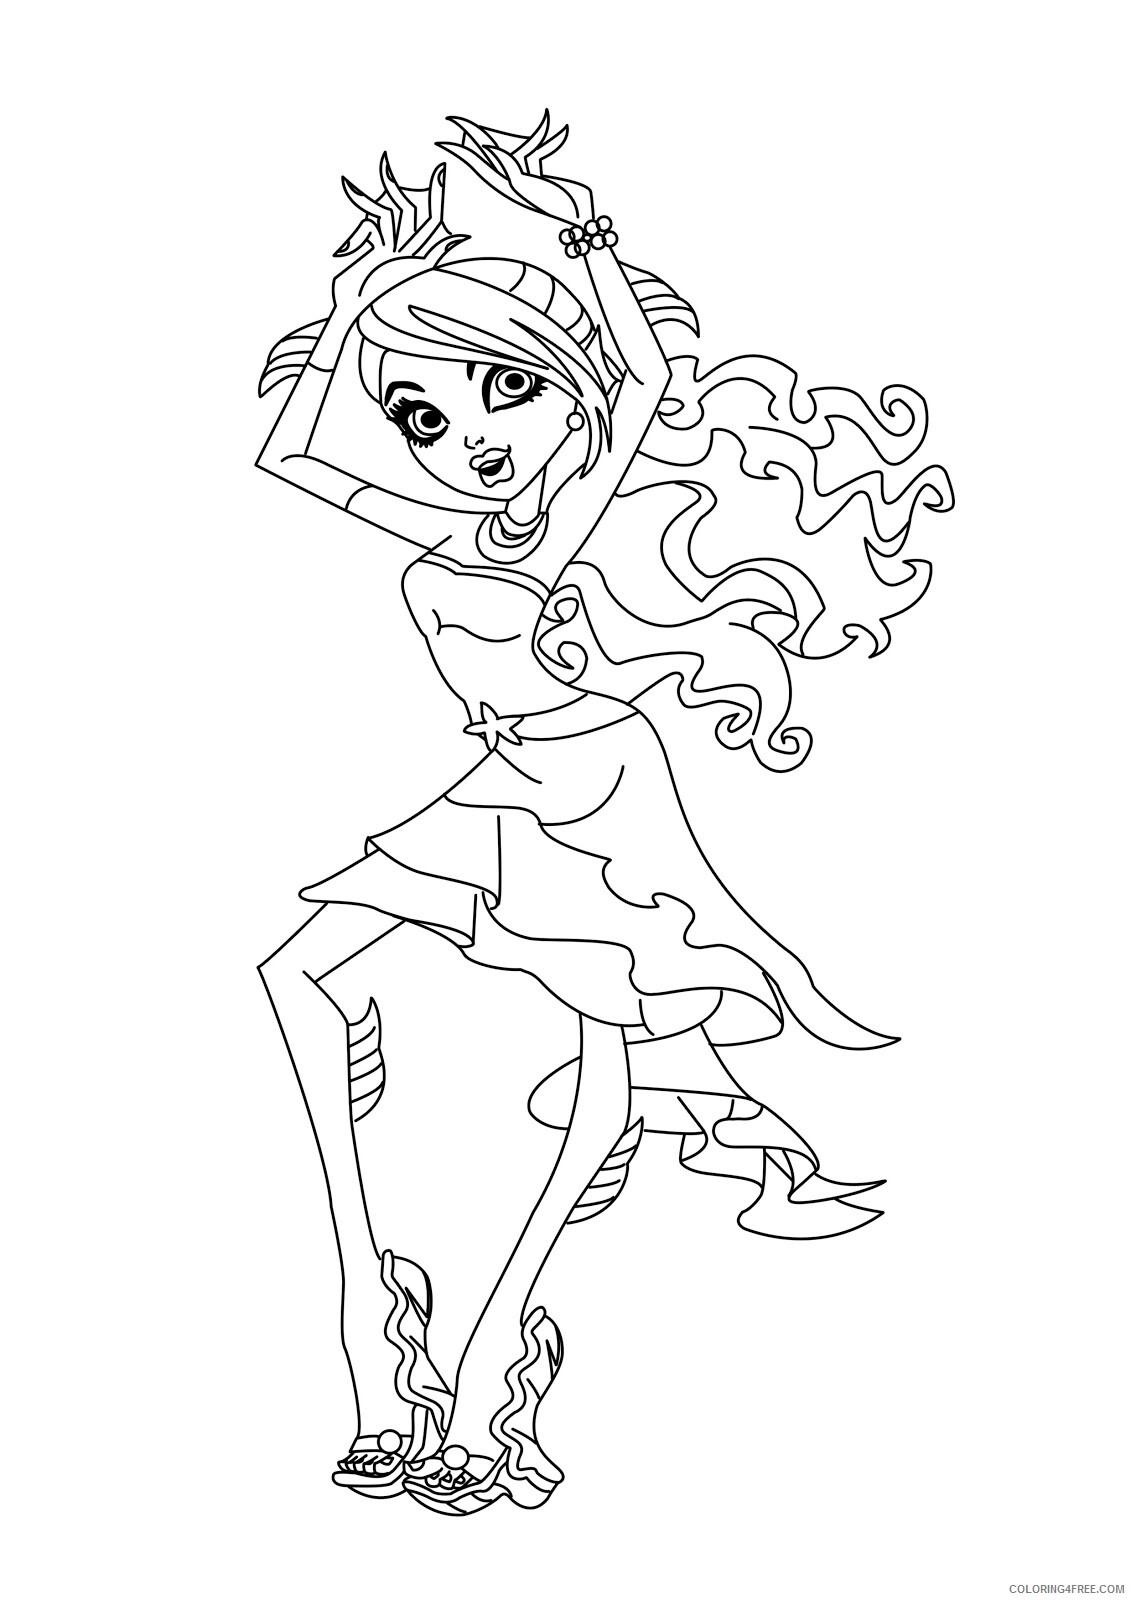 Monster High Coloring Pages Monster High Image Printable 2021 4154 Coloring4free